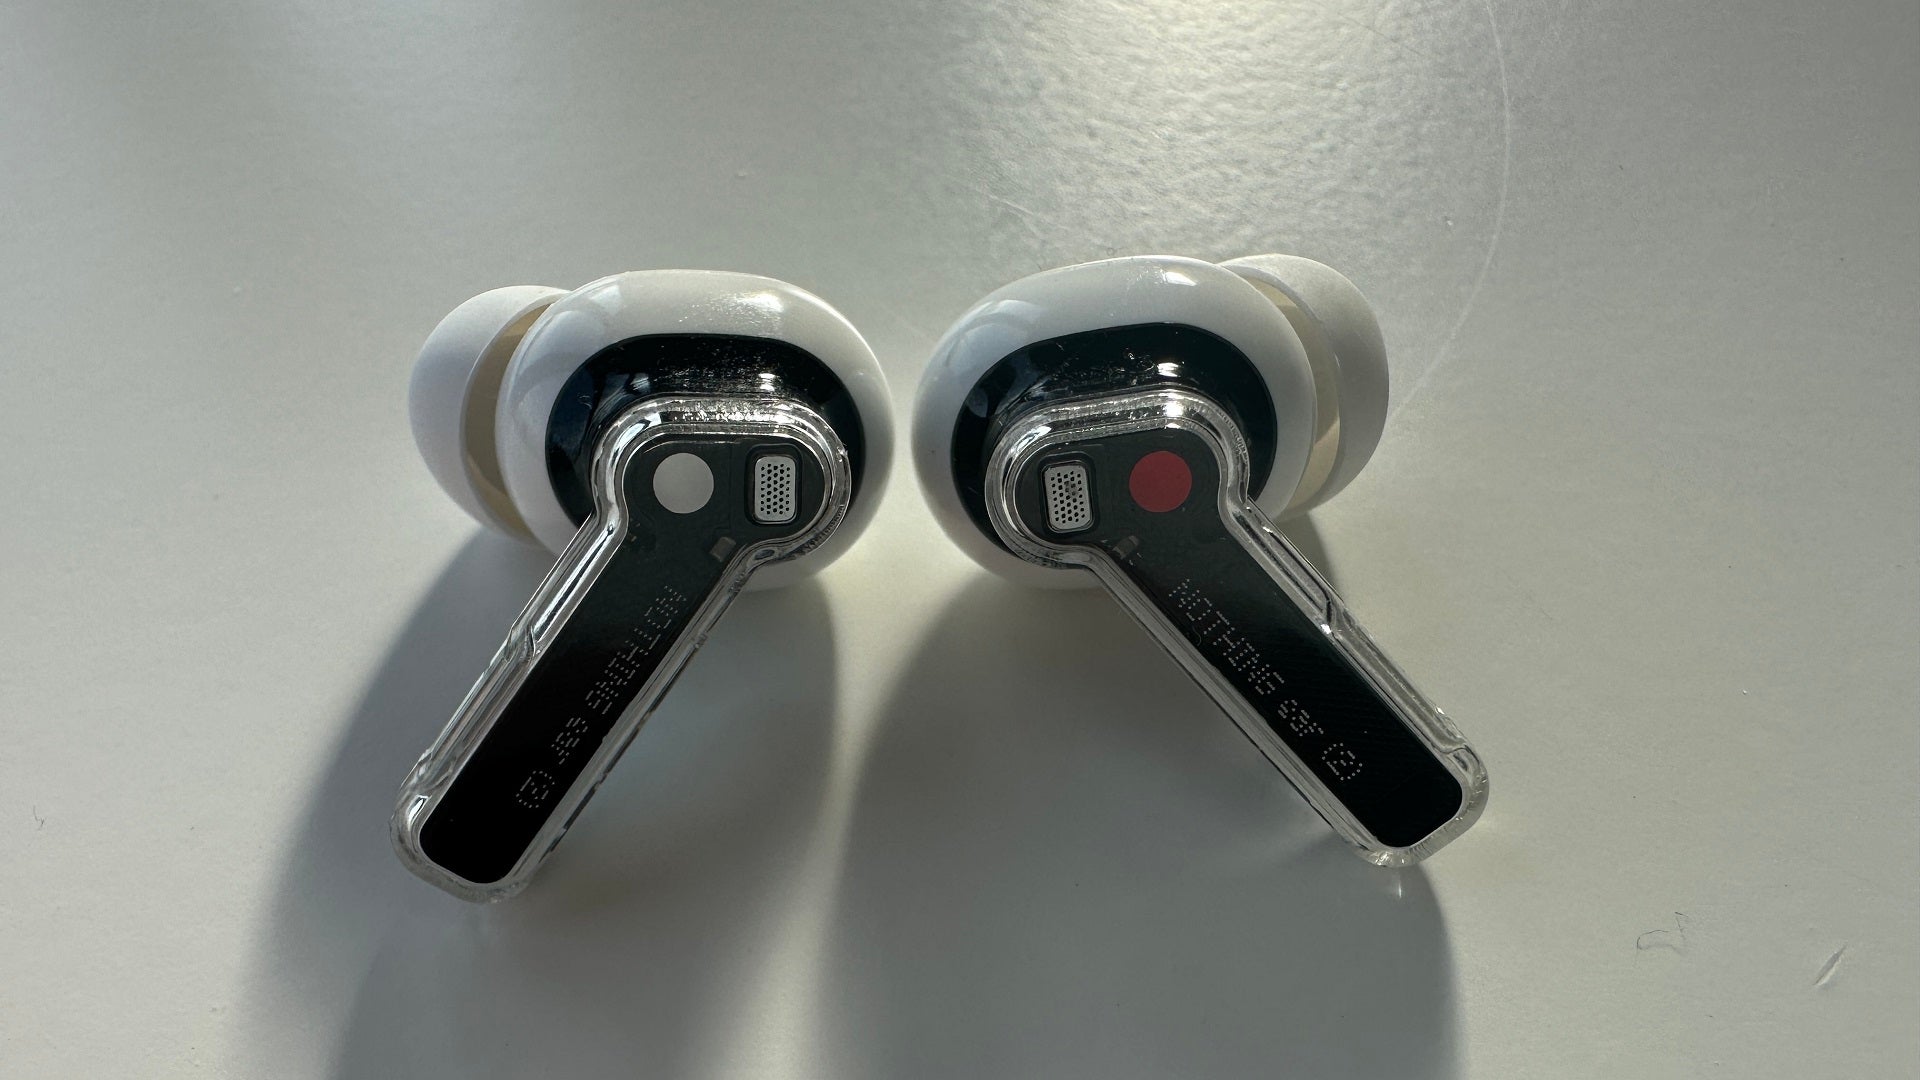 Images of Black-colored Nothing Ear (2) earbuds hit the web